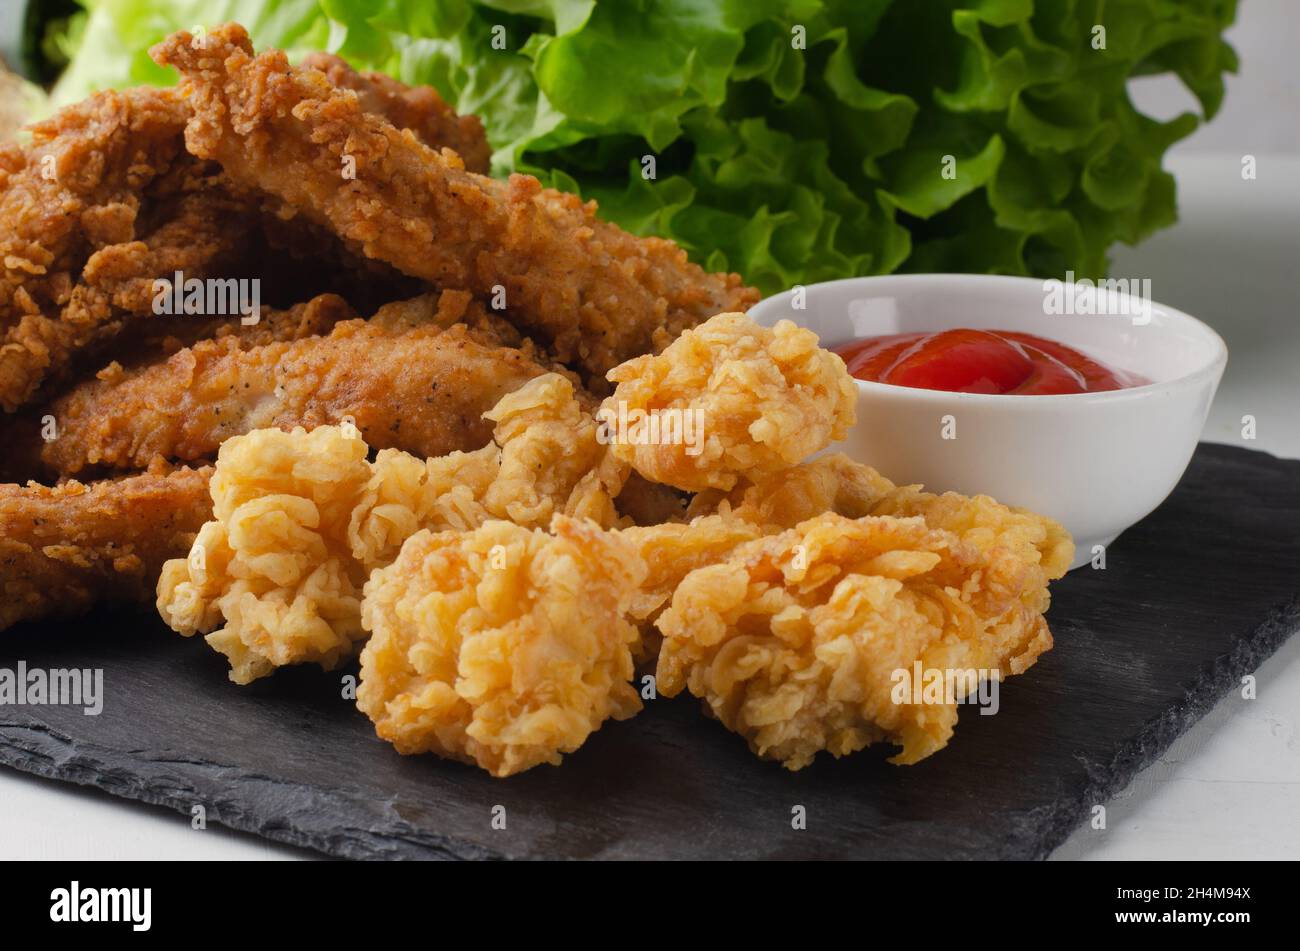 Fried chicken with french fries and nuggets. With ketchup. Stock Photo